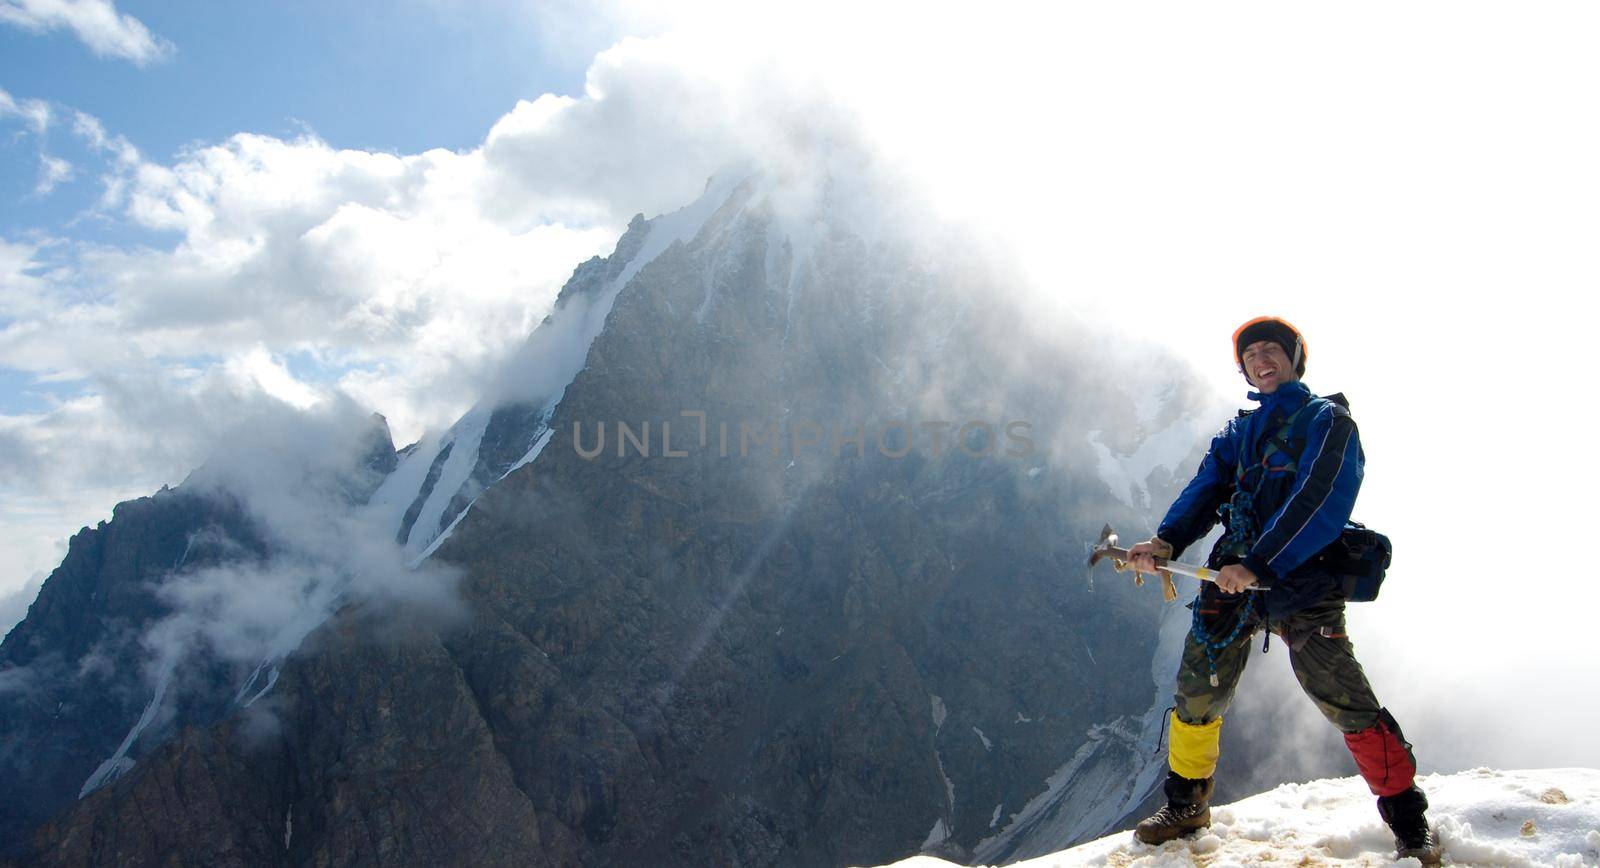 Young mountaineer is standing at the very edge of a rocky mountain top. Behind him is the sun shining right throung the cloud creating great lighting effect